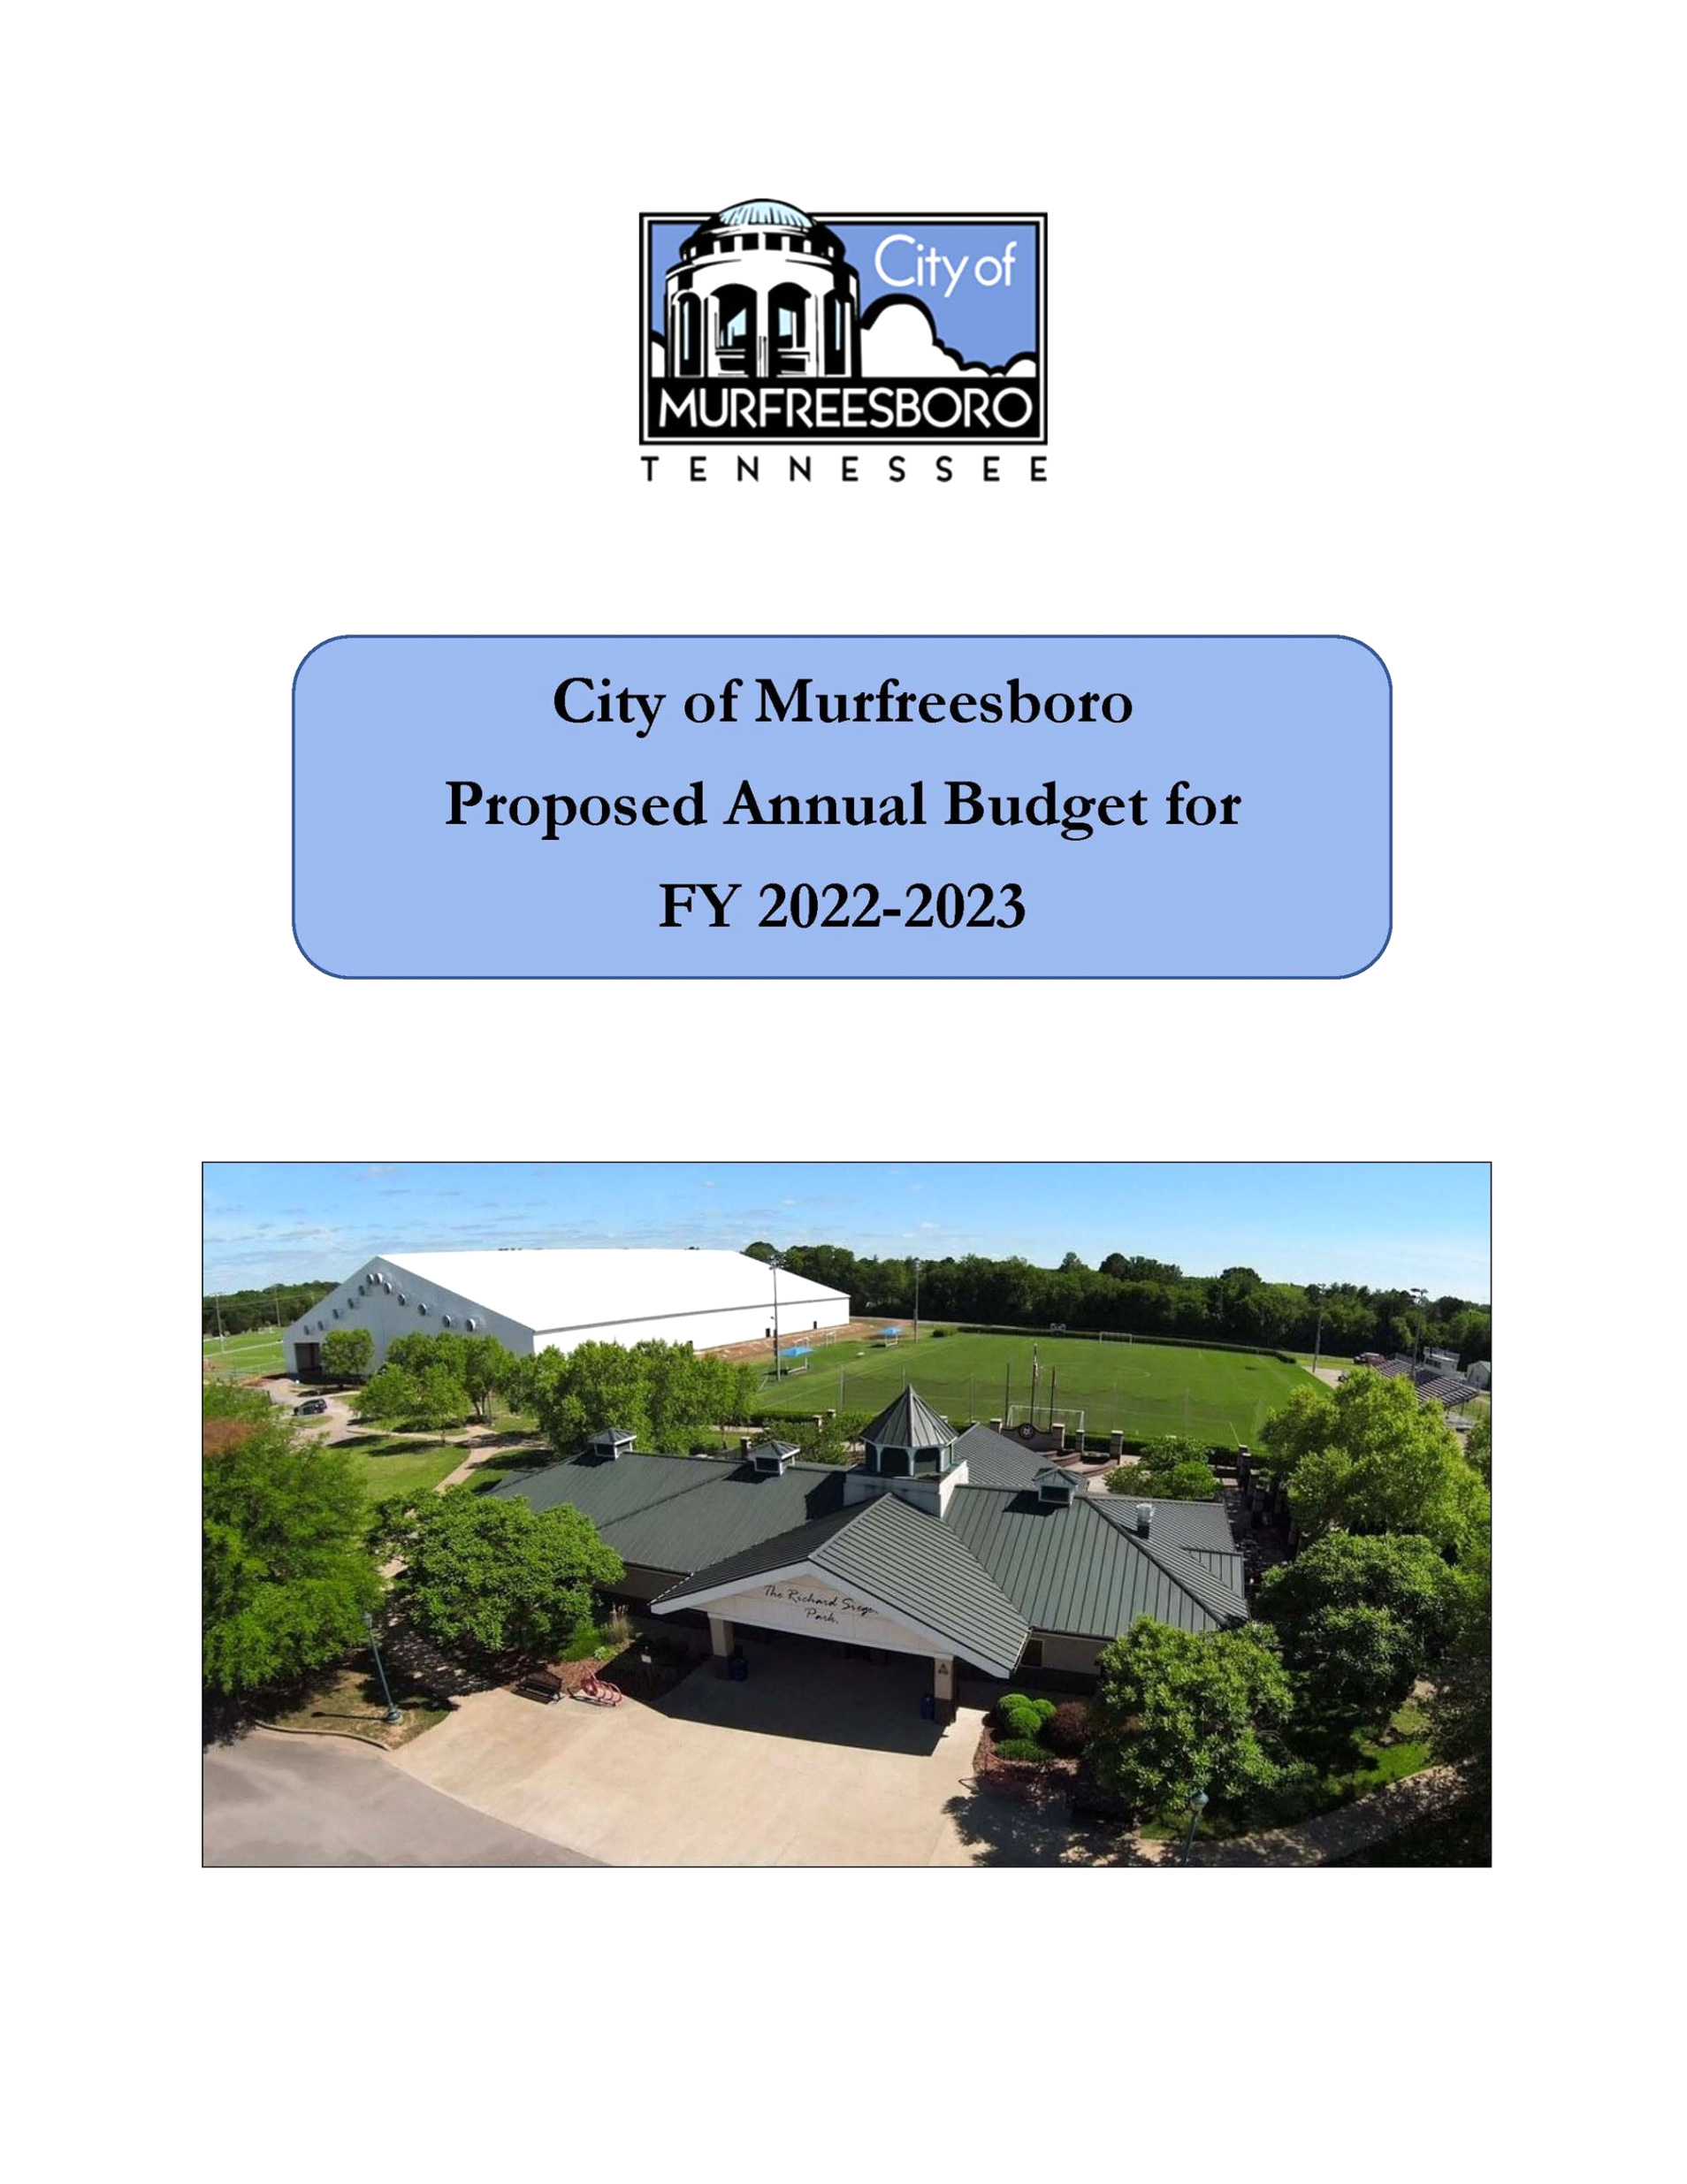 Cheap Vpn In Clark Wa Dans City Of Murfreesboro Proposed Annual Budget for Fy 2022-2023